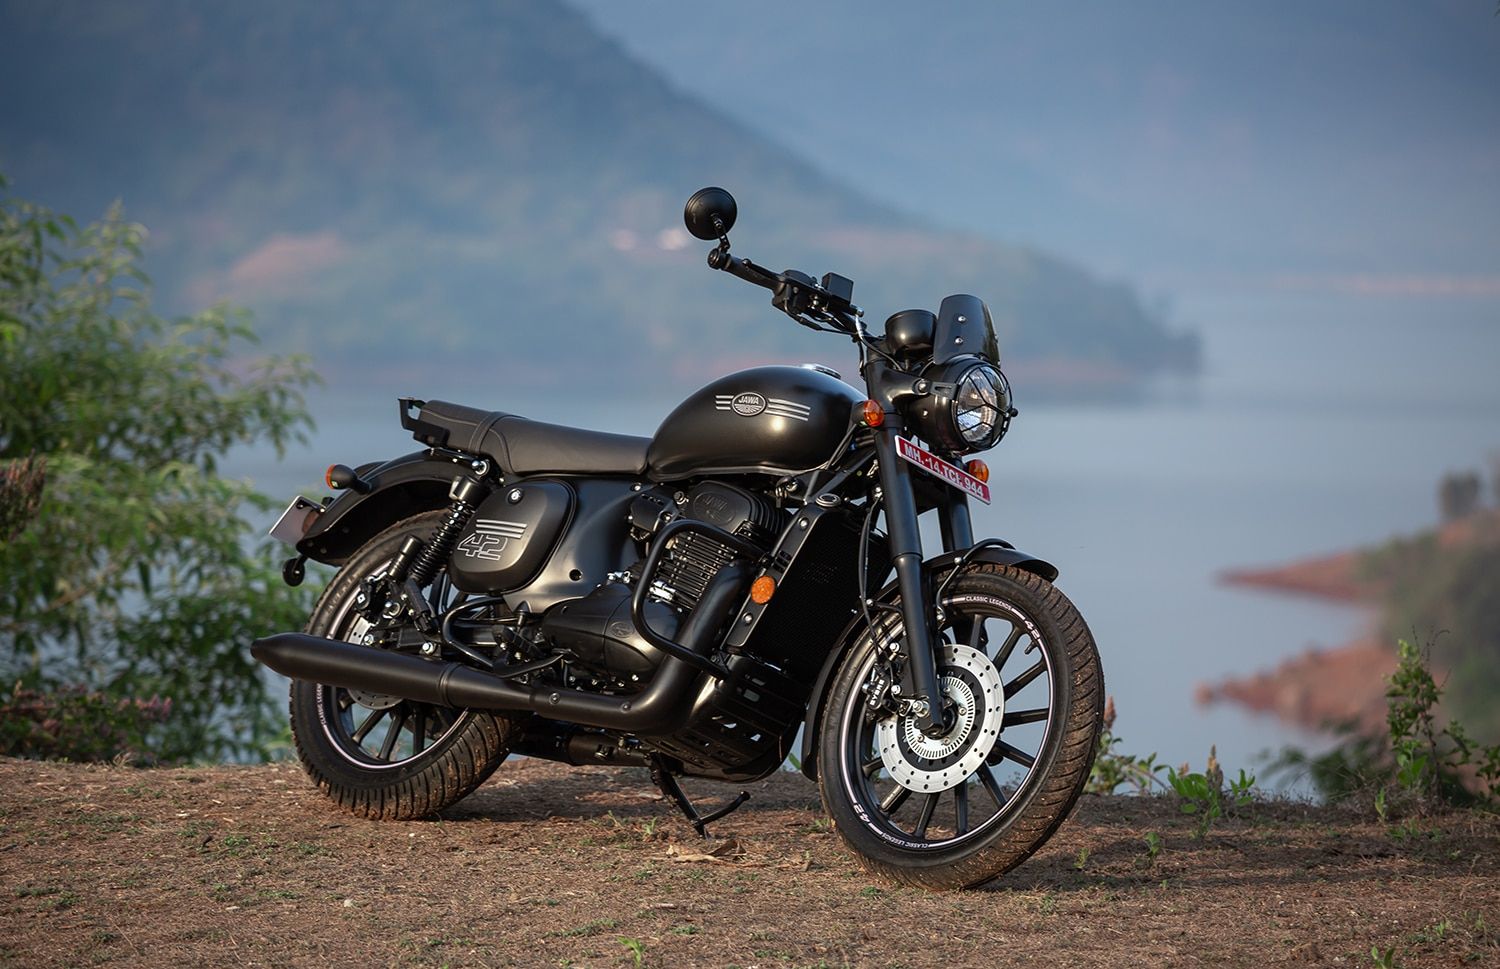 Jawa 42 2.1 Launched In India